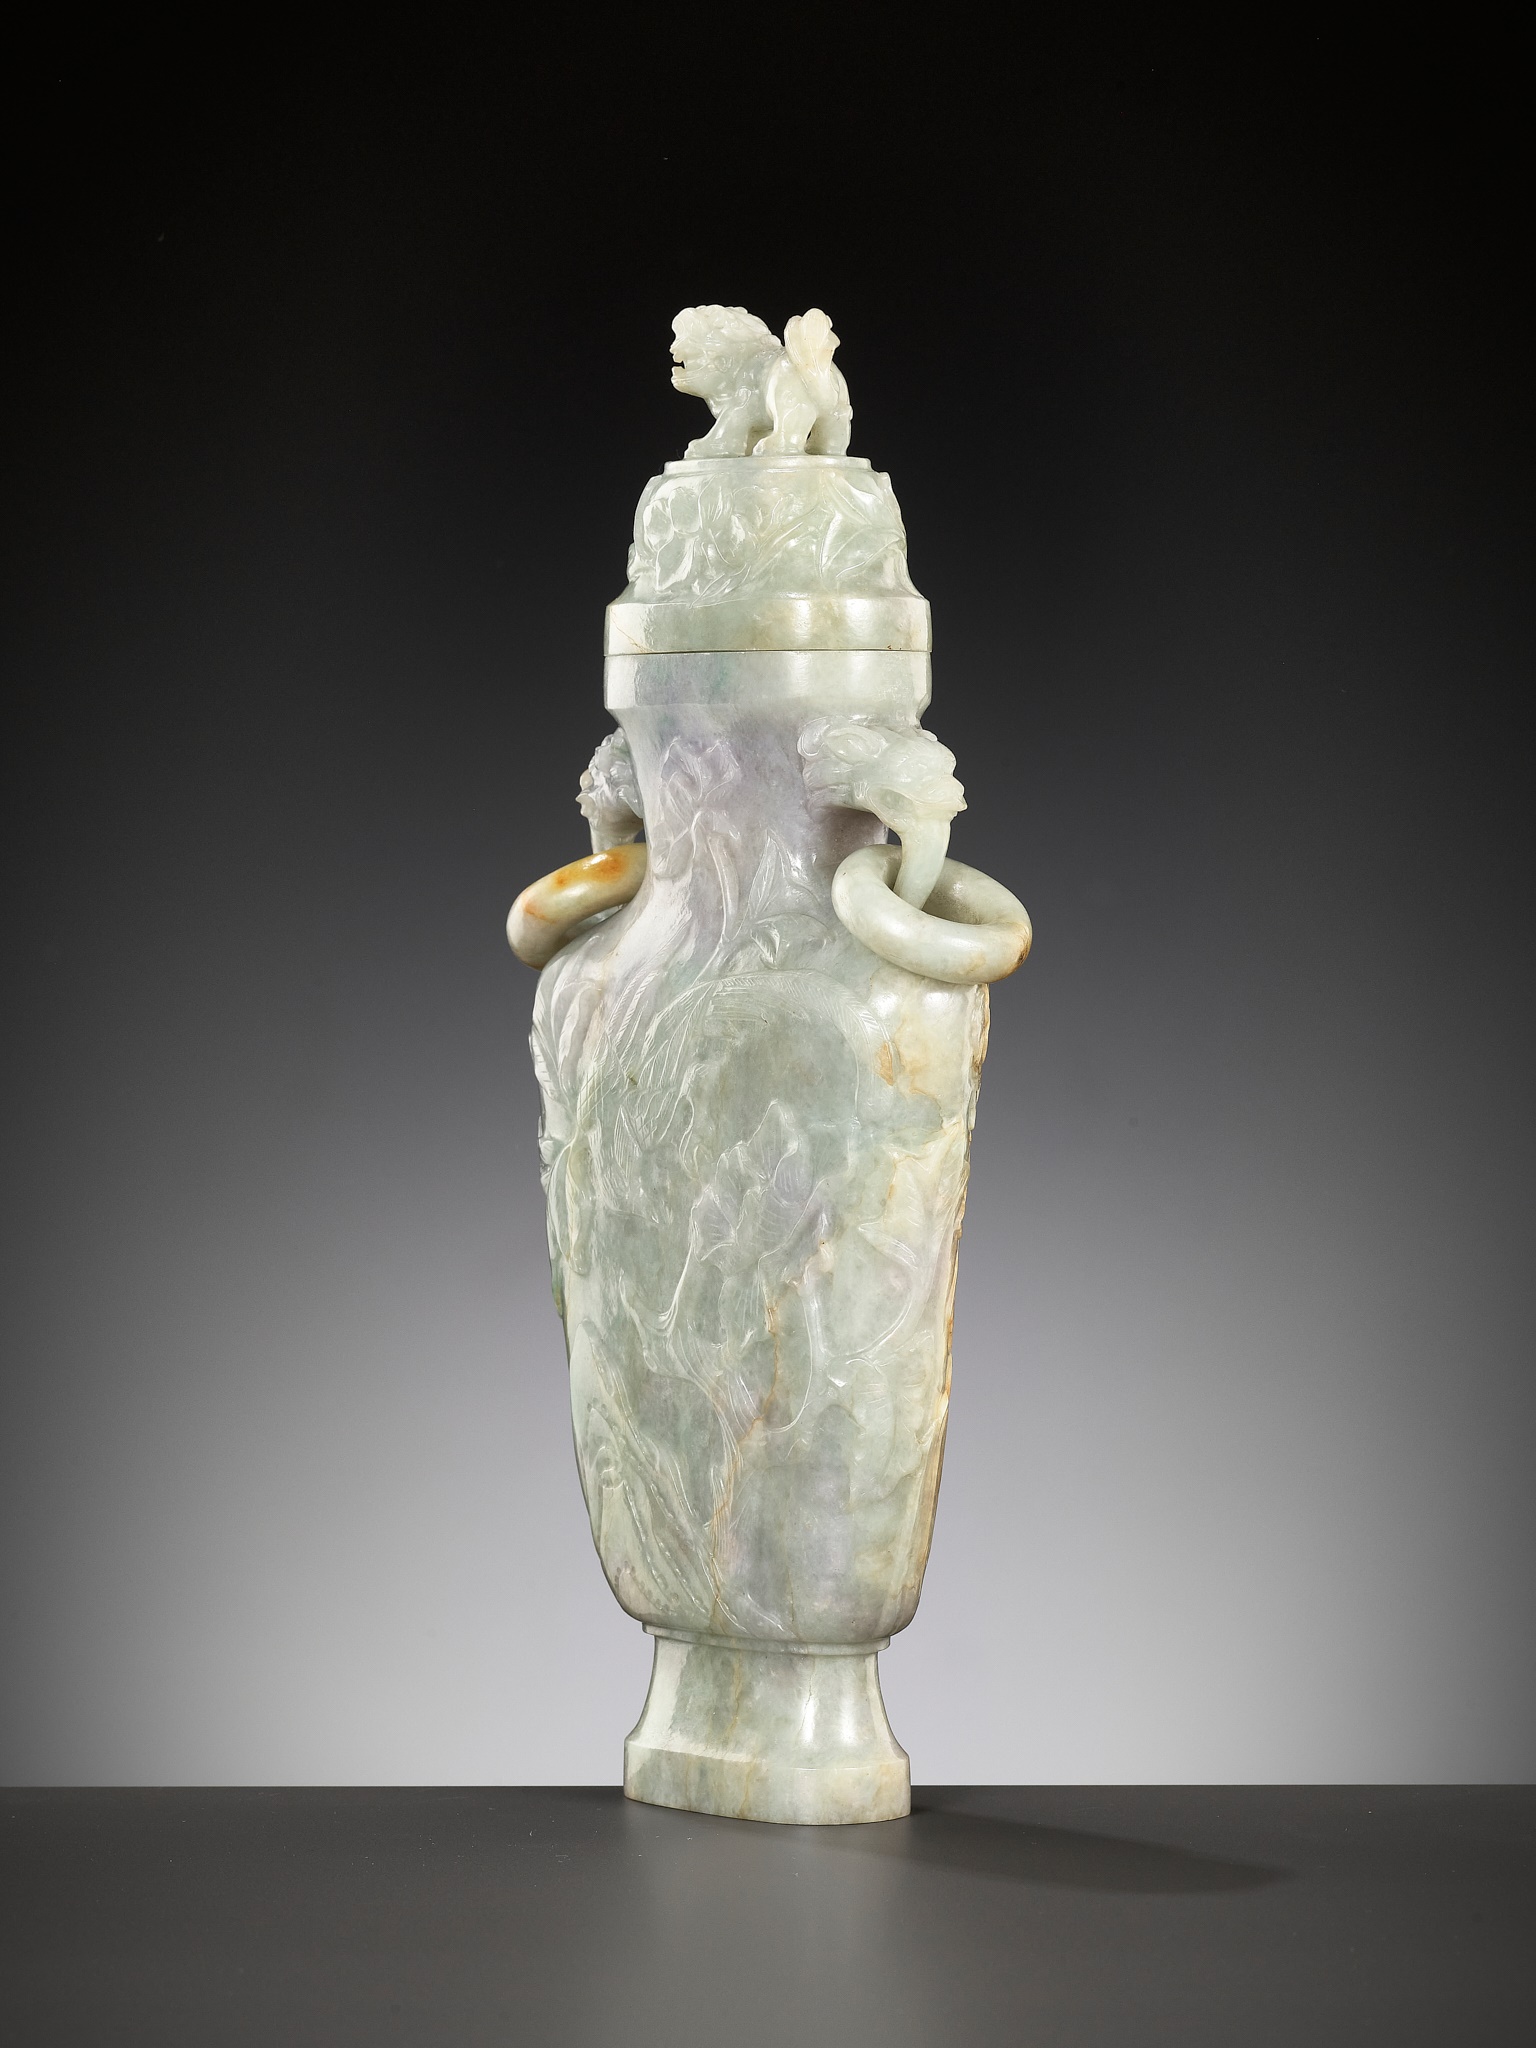 A JADEITE BALUSTER VASE AND COVER, LATE QING DYNASTY TO REPUBLIC PERIOD - Image 8 of 12